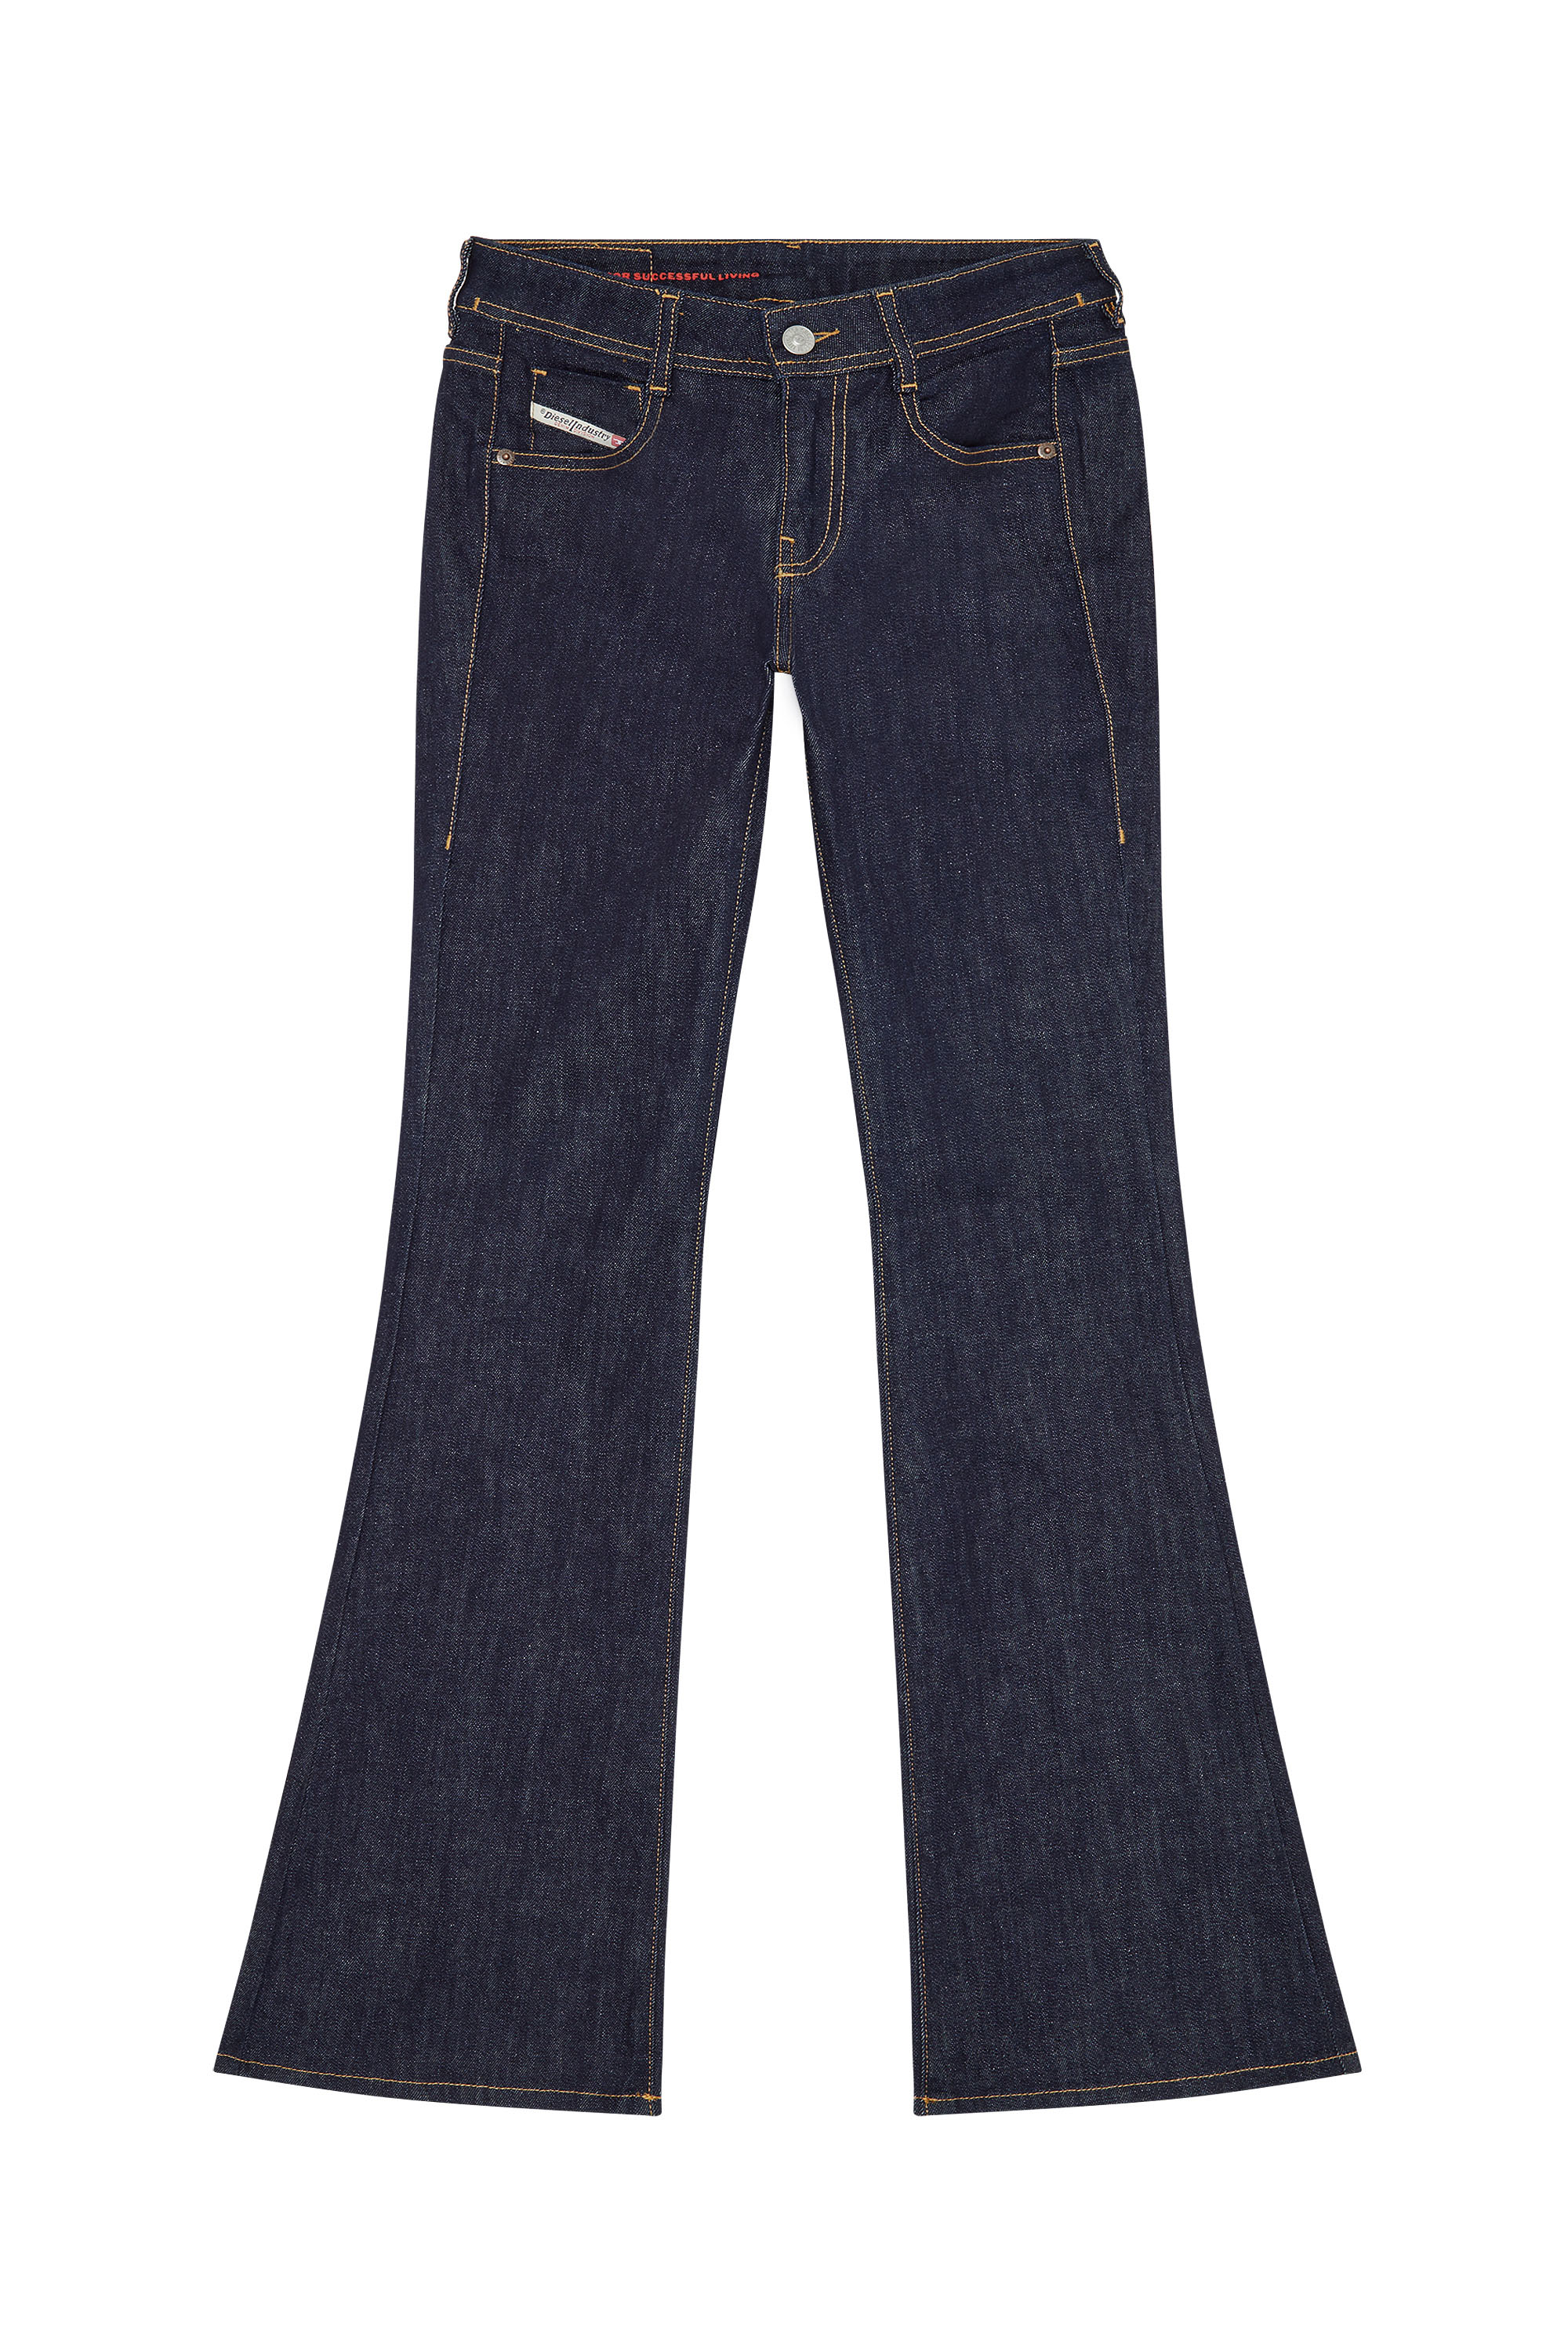 1969 D-EBBEY Z9B89 Bootcut and Flare Jeans, Azul Oscuro - Vaqueros